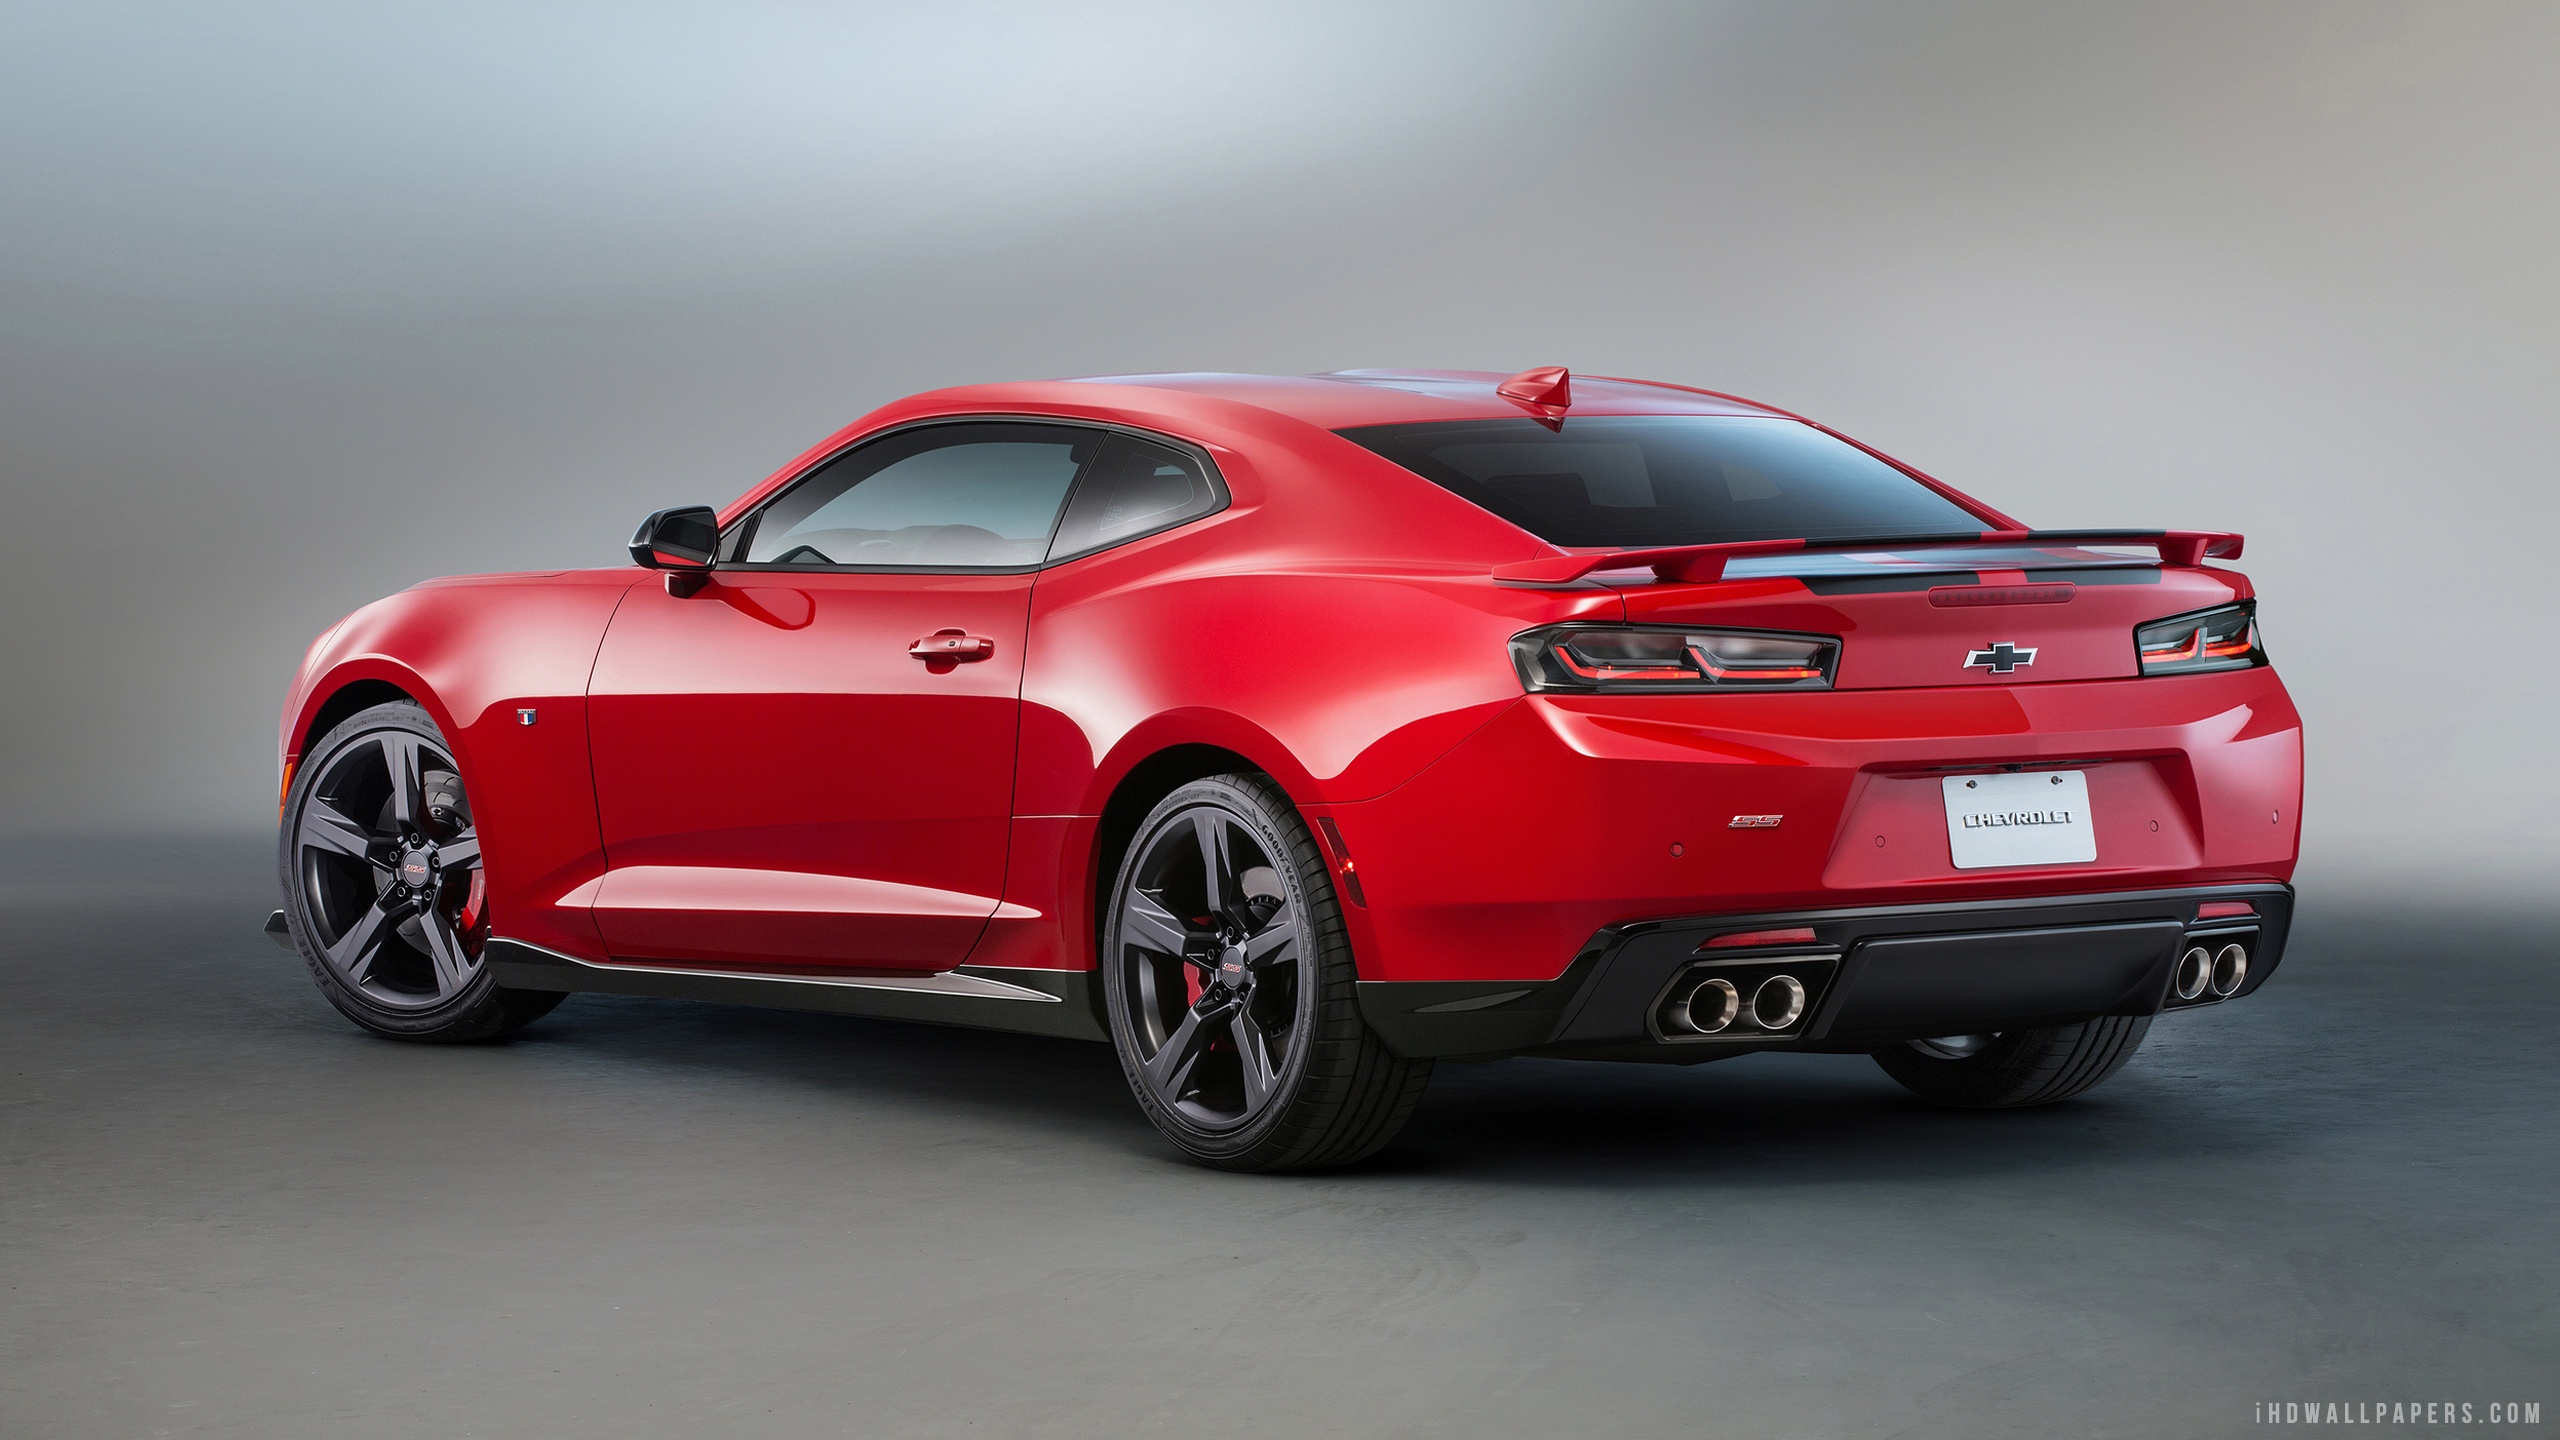 Chevy Camaro Red And Black Accent HD Wallpaper IHD